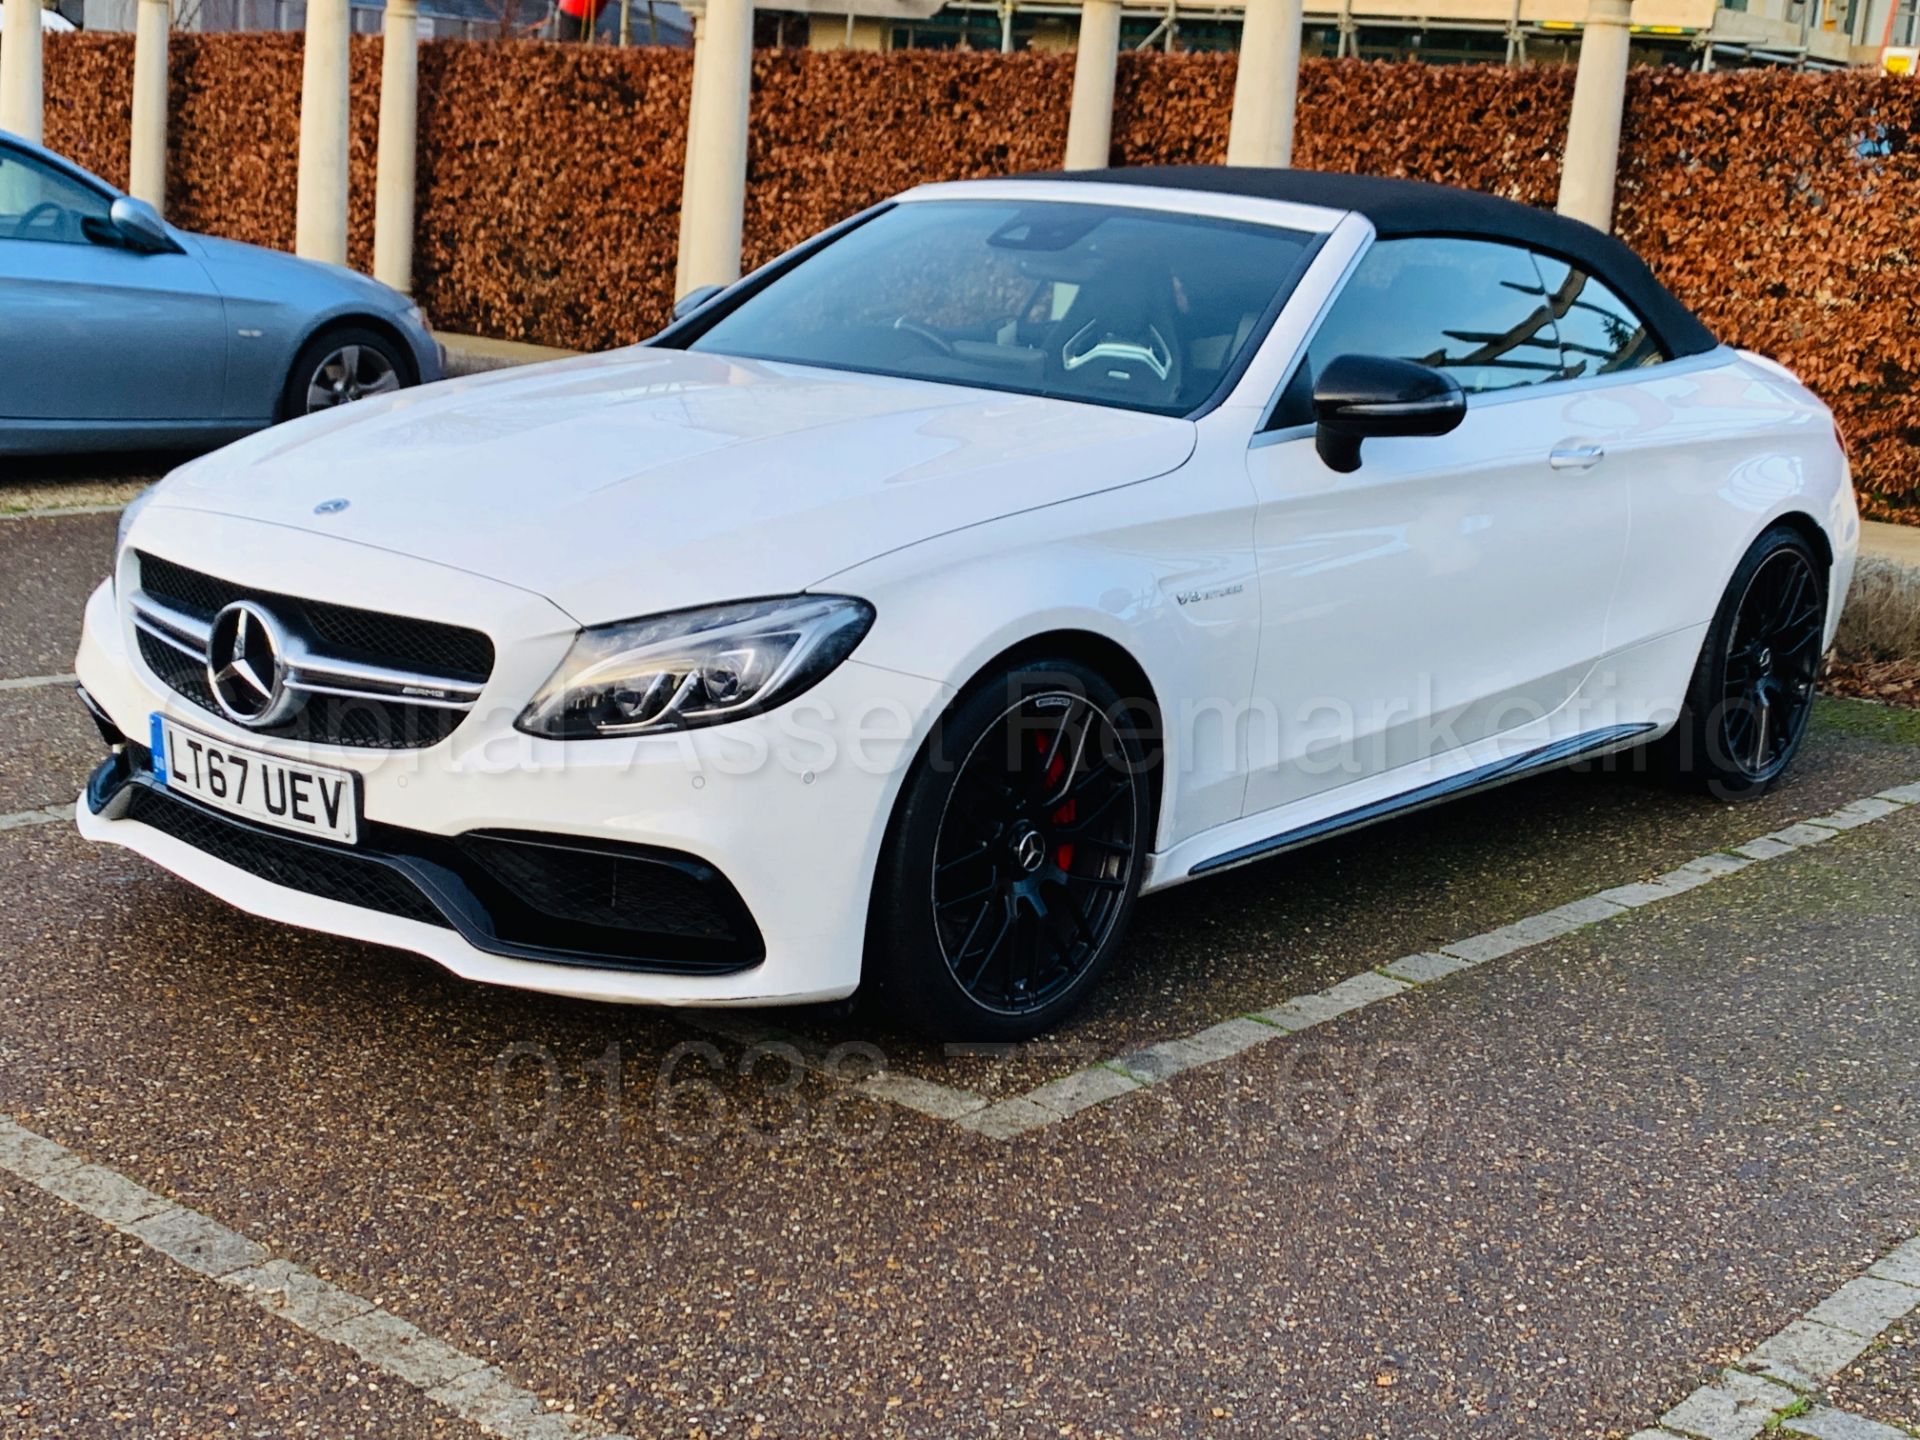 (On Sale) MERCEDES-BENZ AMG C63-S *CABRIOLET* (67 REG) '4.0 BI-TURBO -510 BHP - AUTO' *FULLY LOADED* - Image 12 of 79